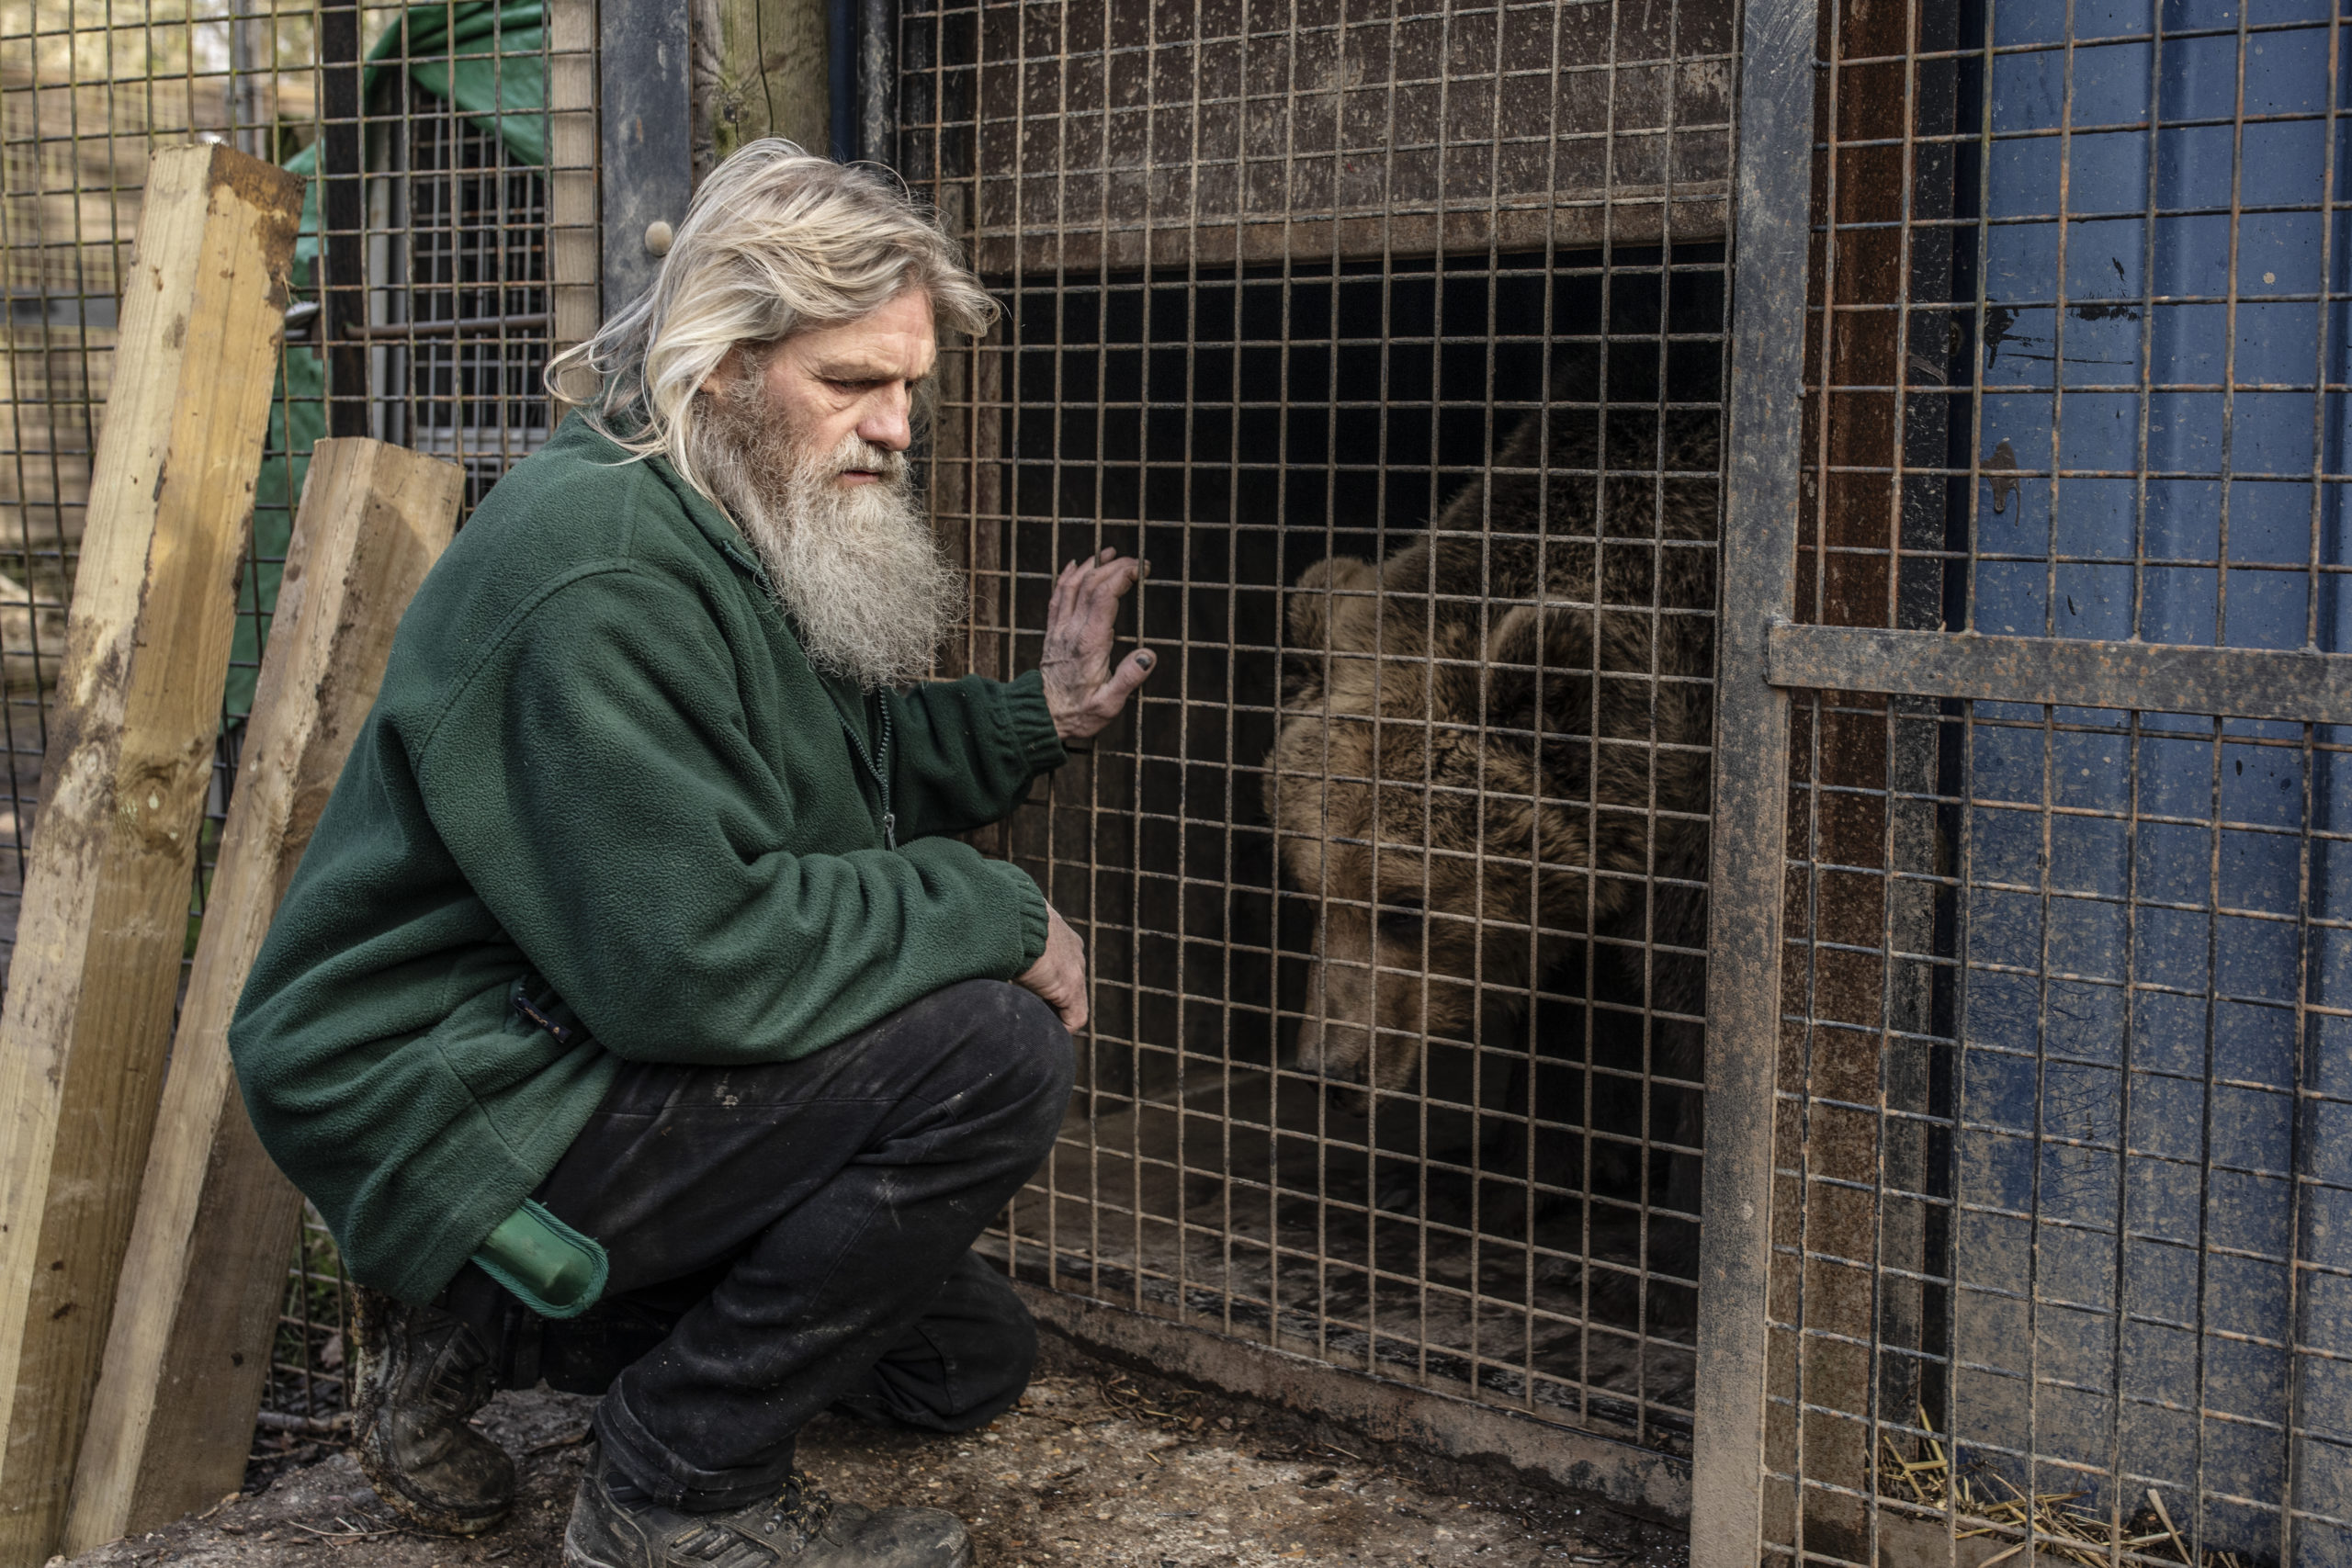  Keeper Paul Wirdman crouches next to a European brown bear in its enclosure. (Photo: Dan Kitwood, Getty Images)